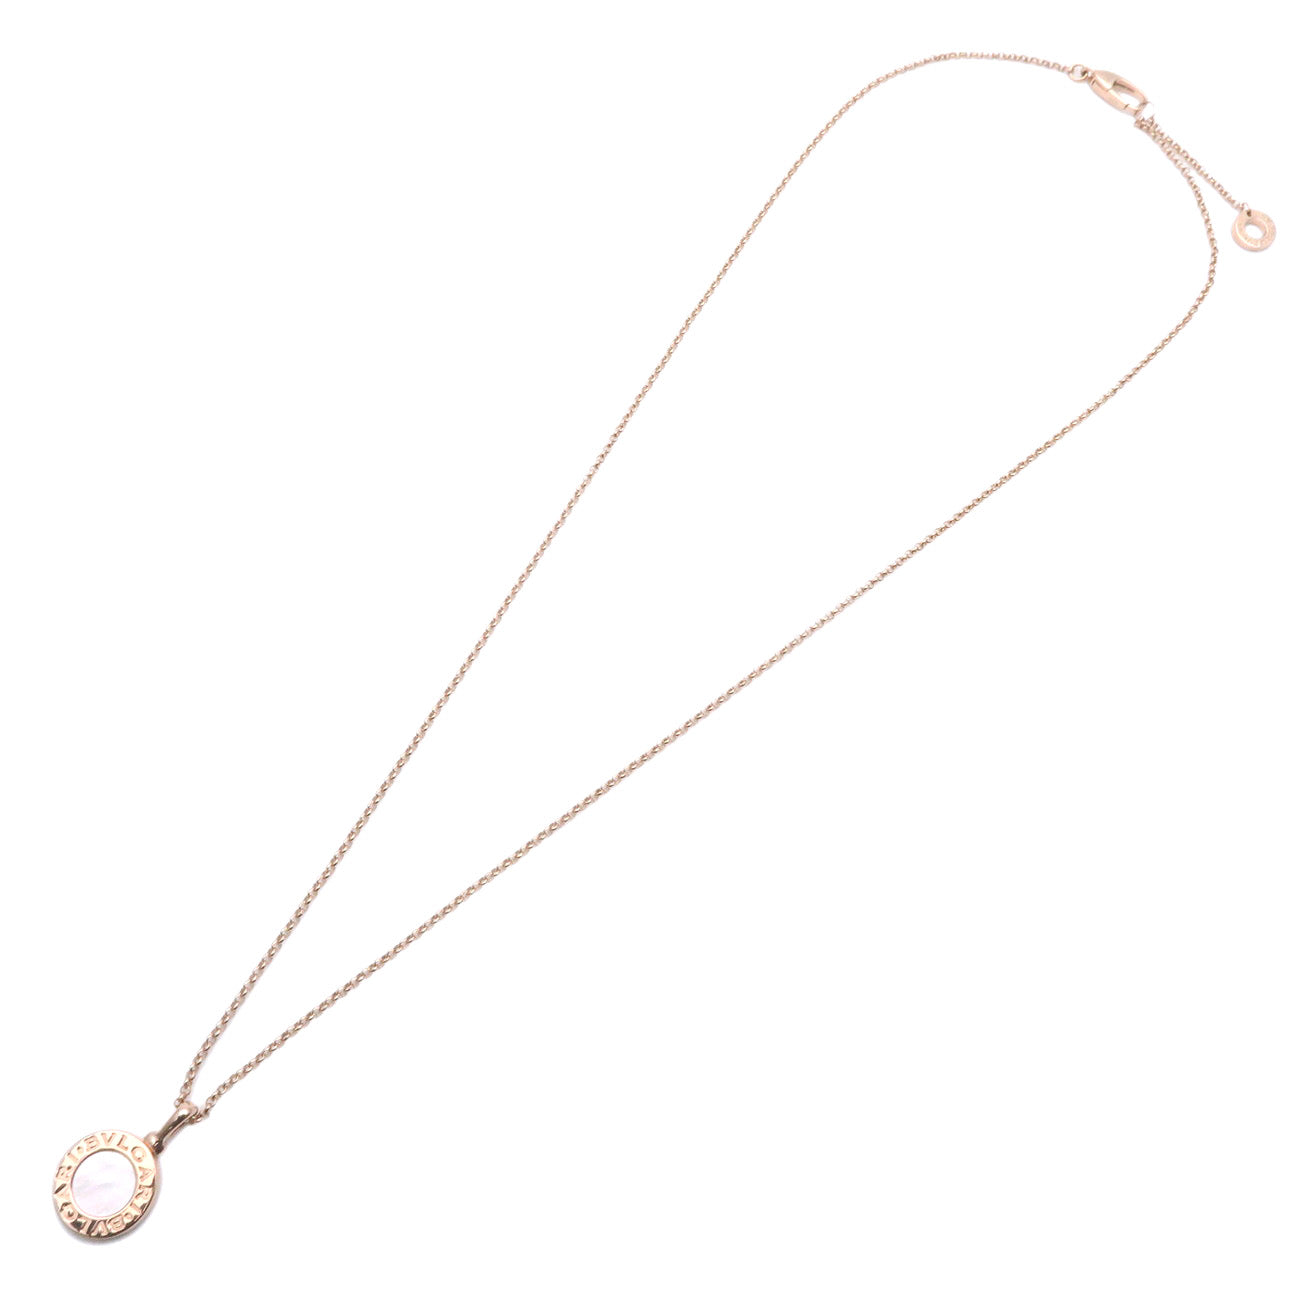 BVLGARI Necklace White Shell Necklace K18 750 Rose Gold